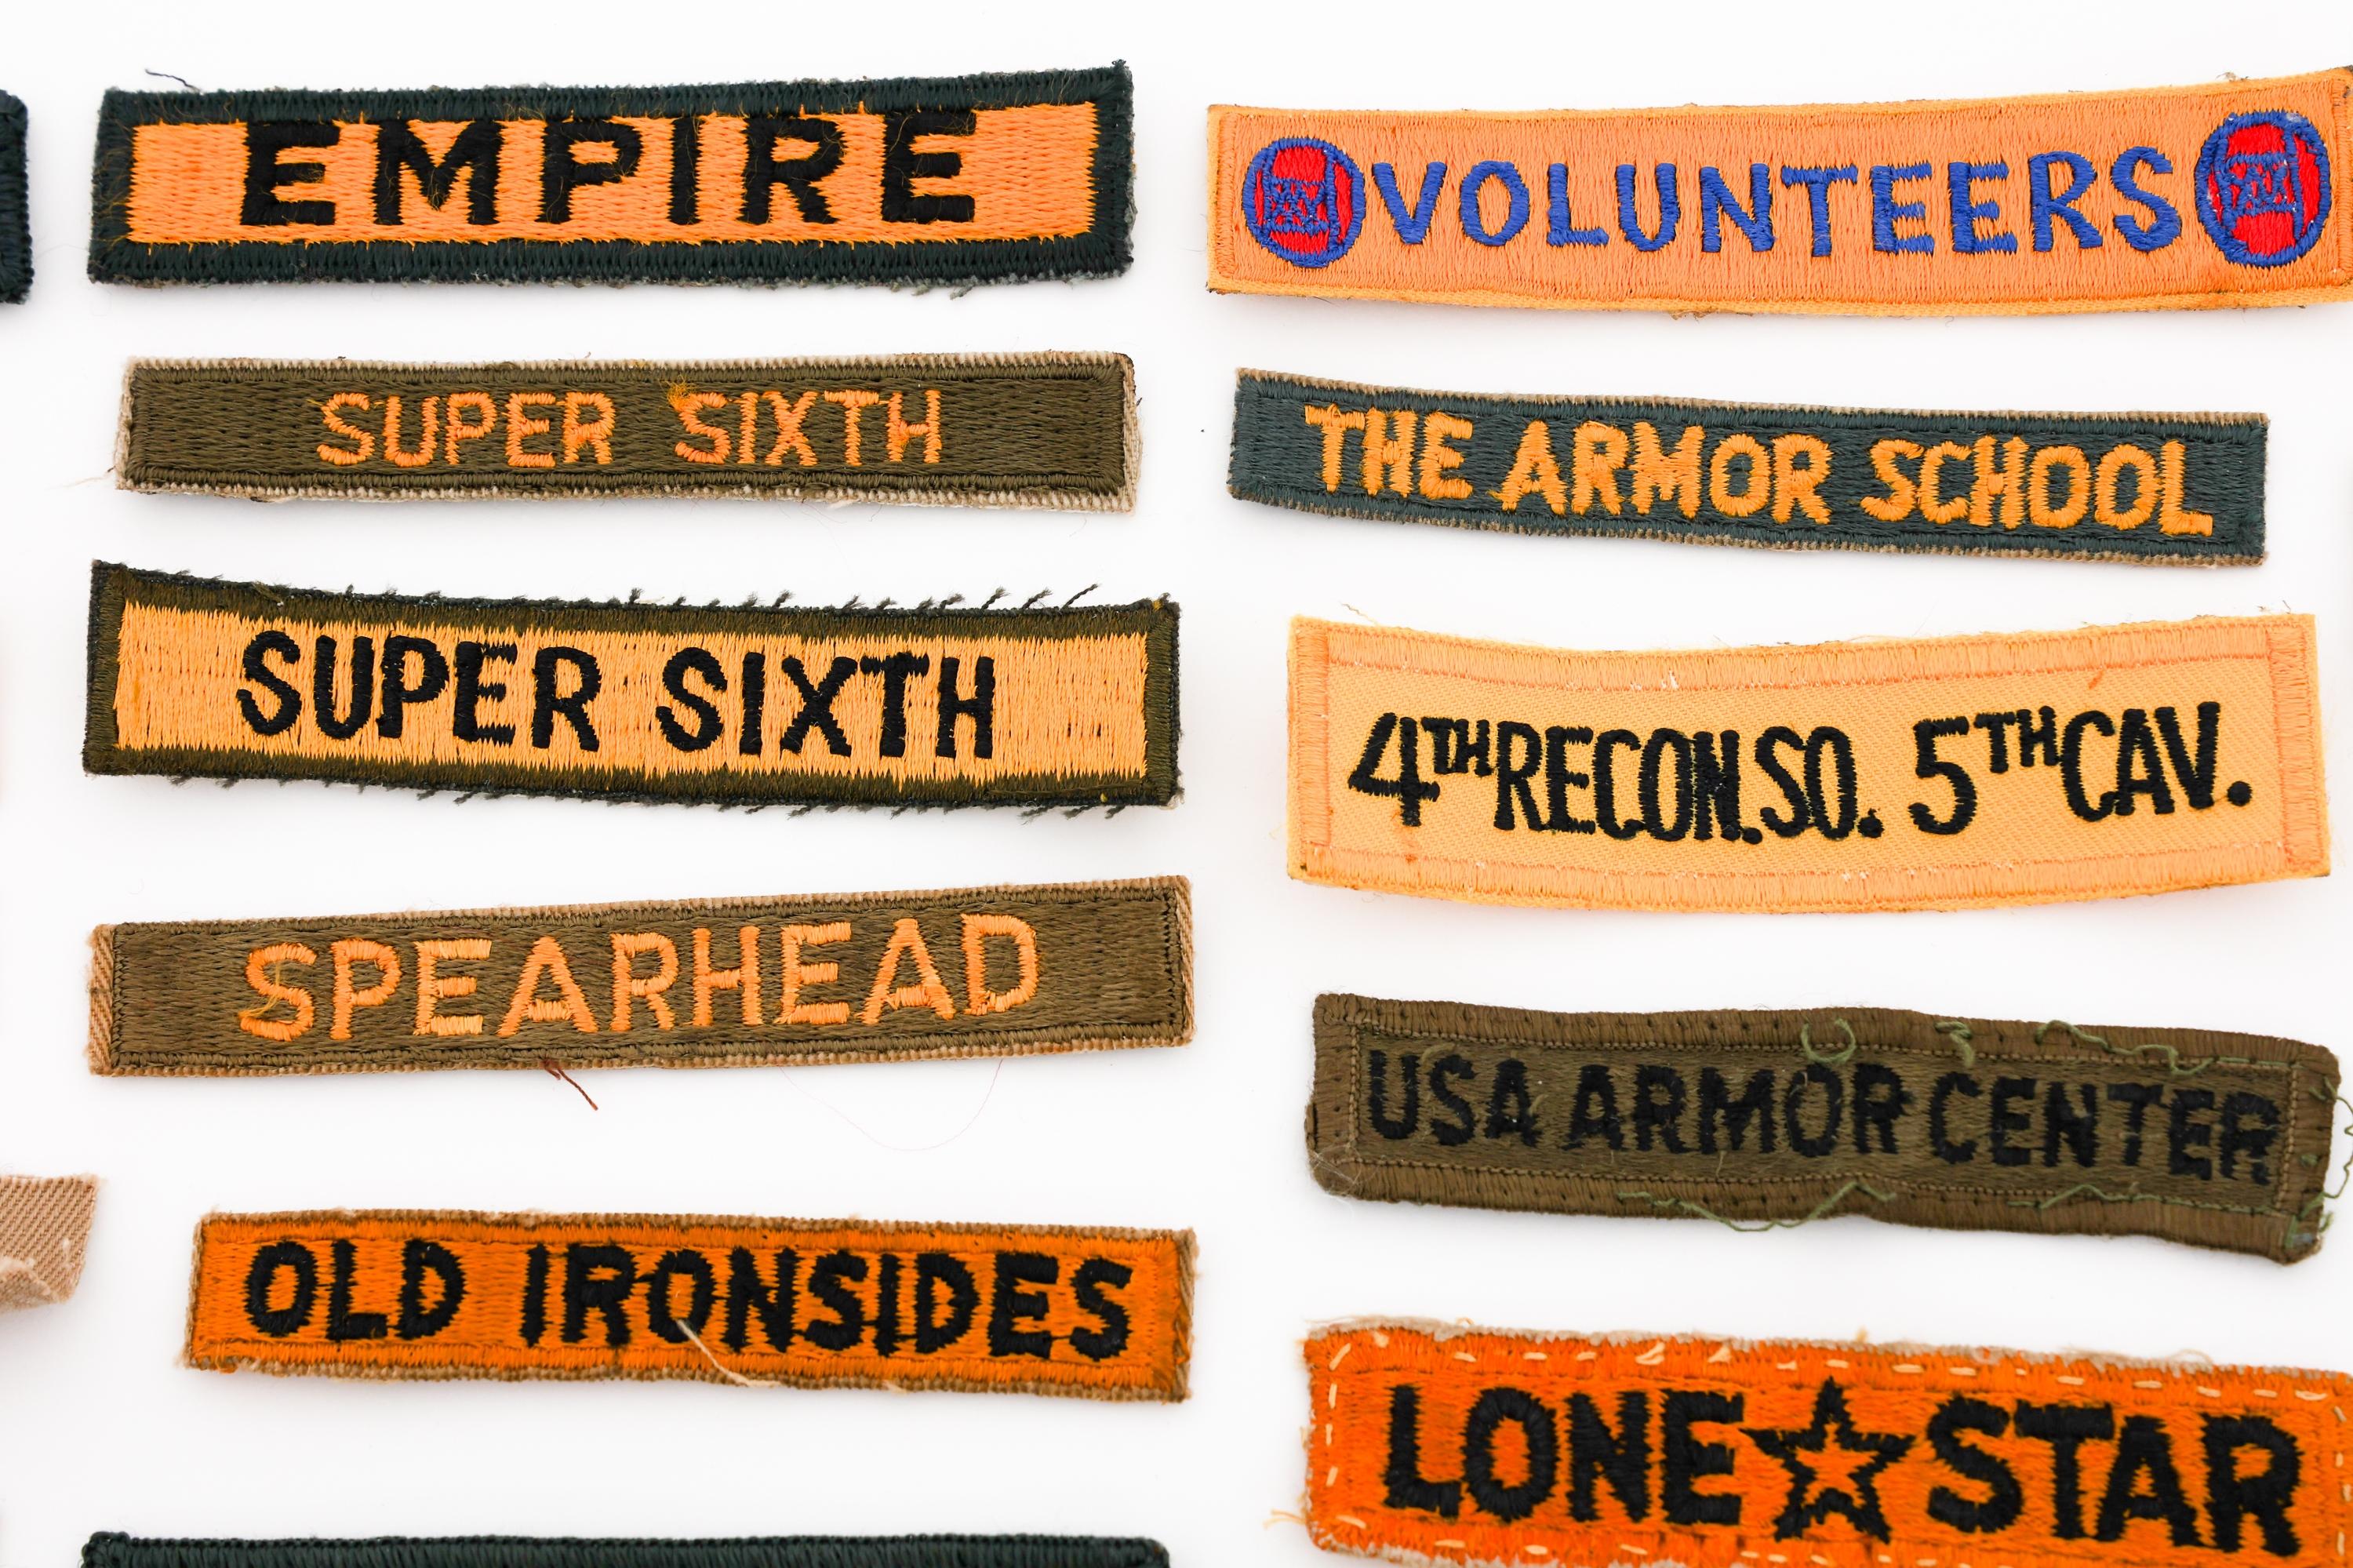 WWII - COLD WAR US ARMY TANKER TABS & PATCHES